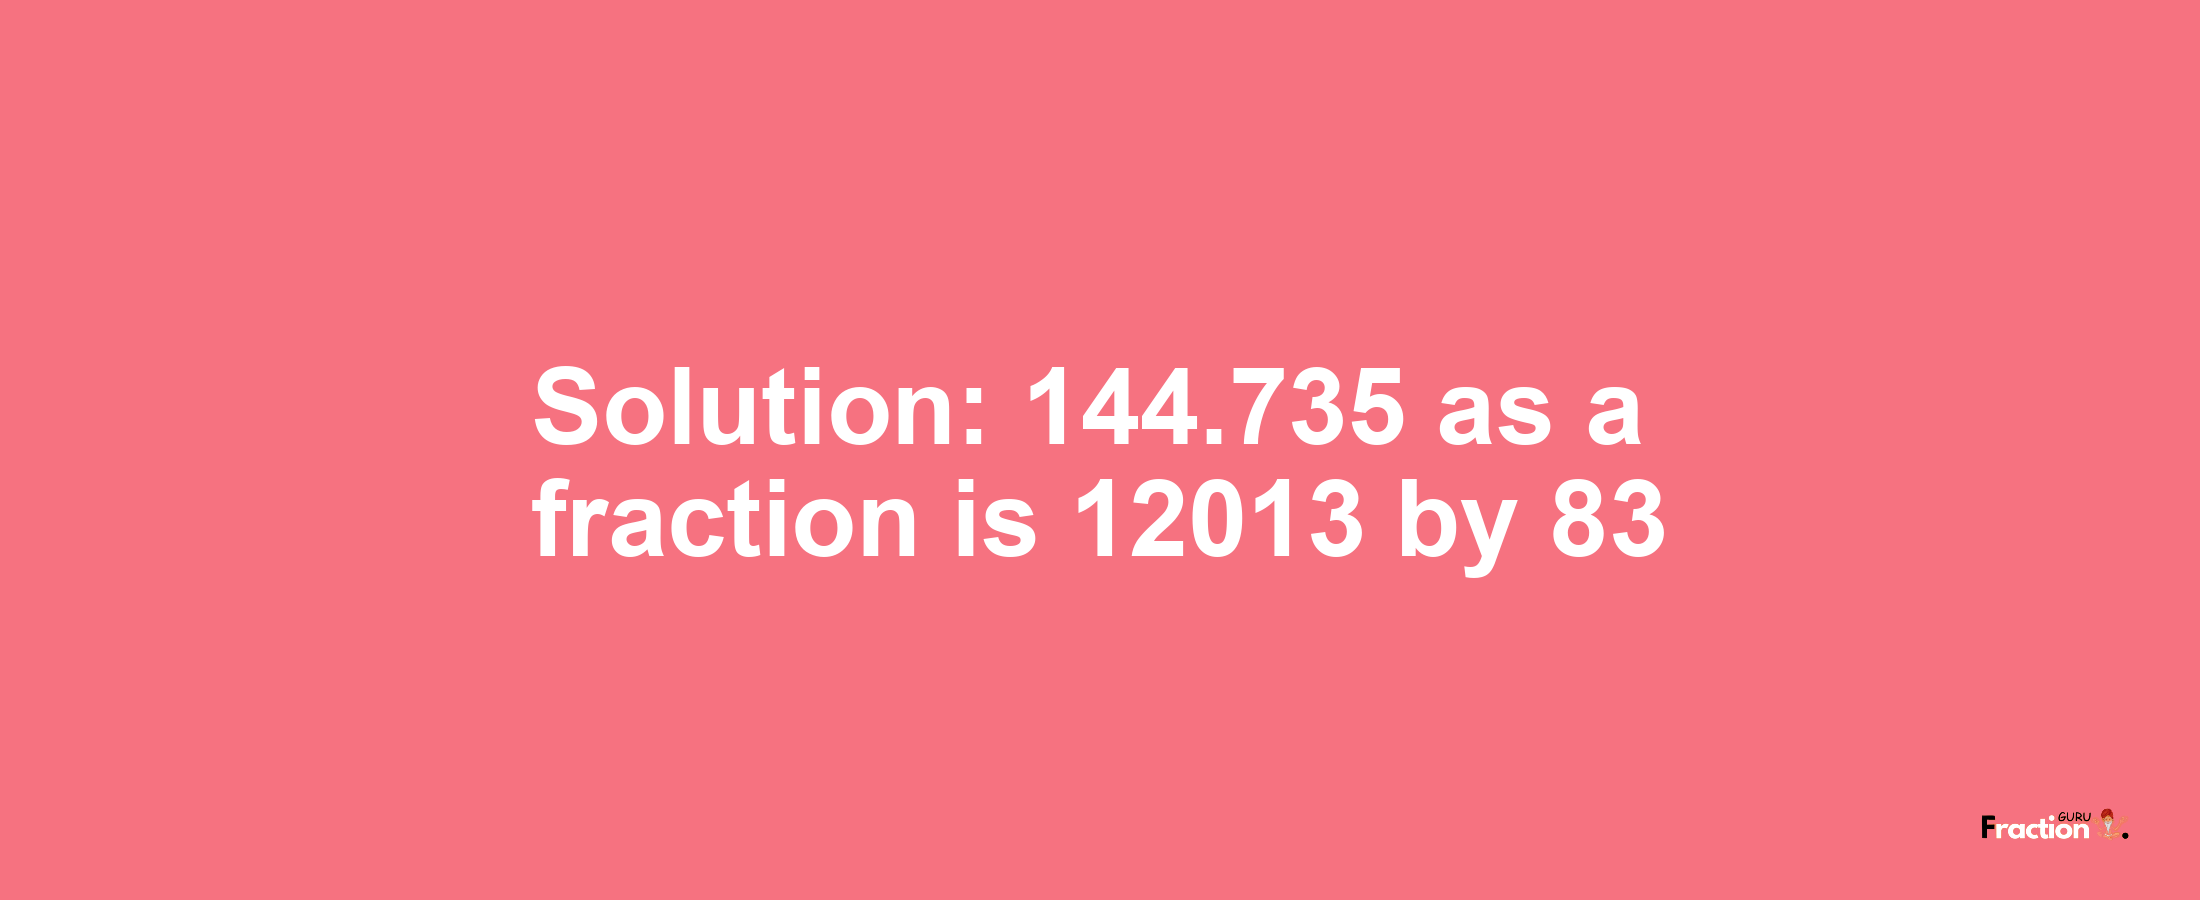 Solution:144.735 as a fraction is 12013/83